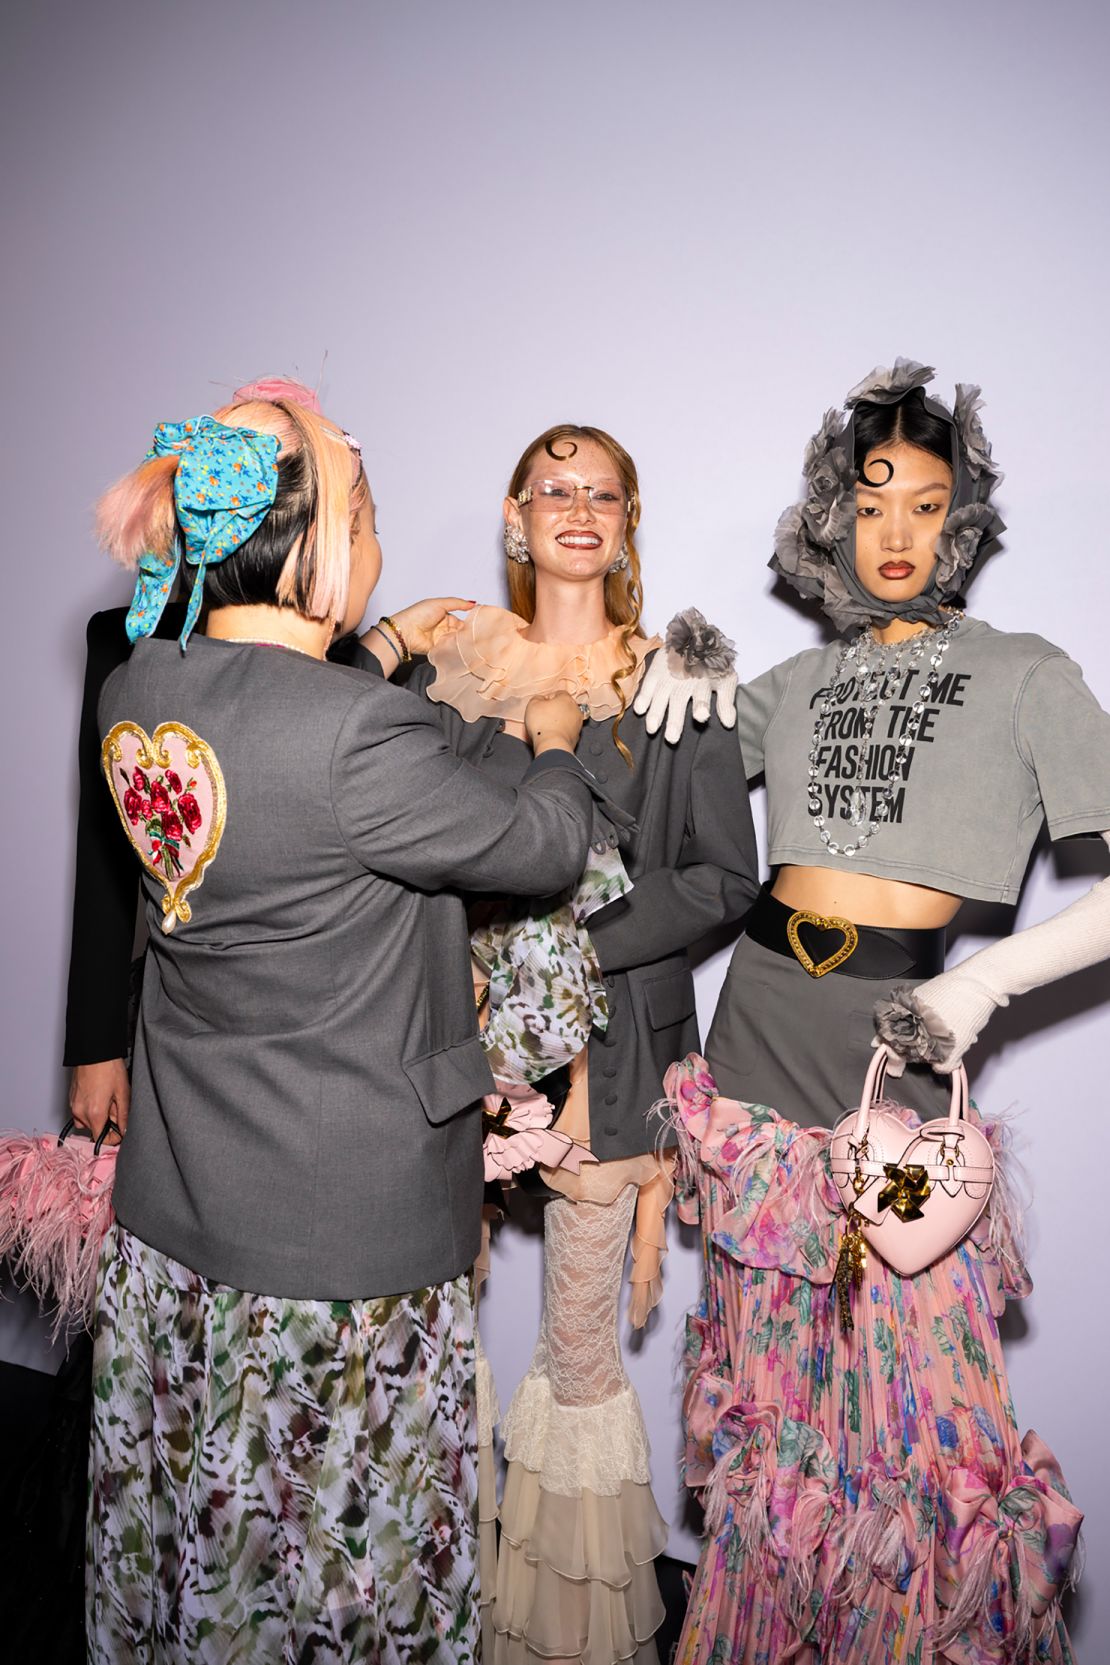 Without creative director Jeremy Scott, the latest Moschino collection was built by a series of stylists.